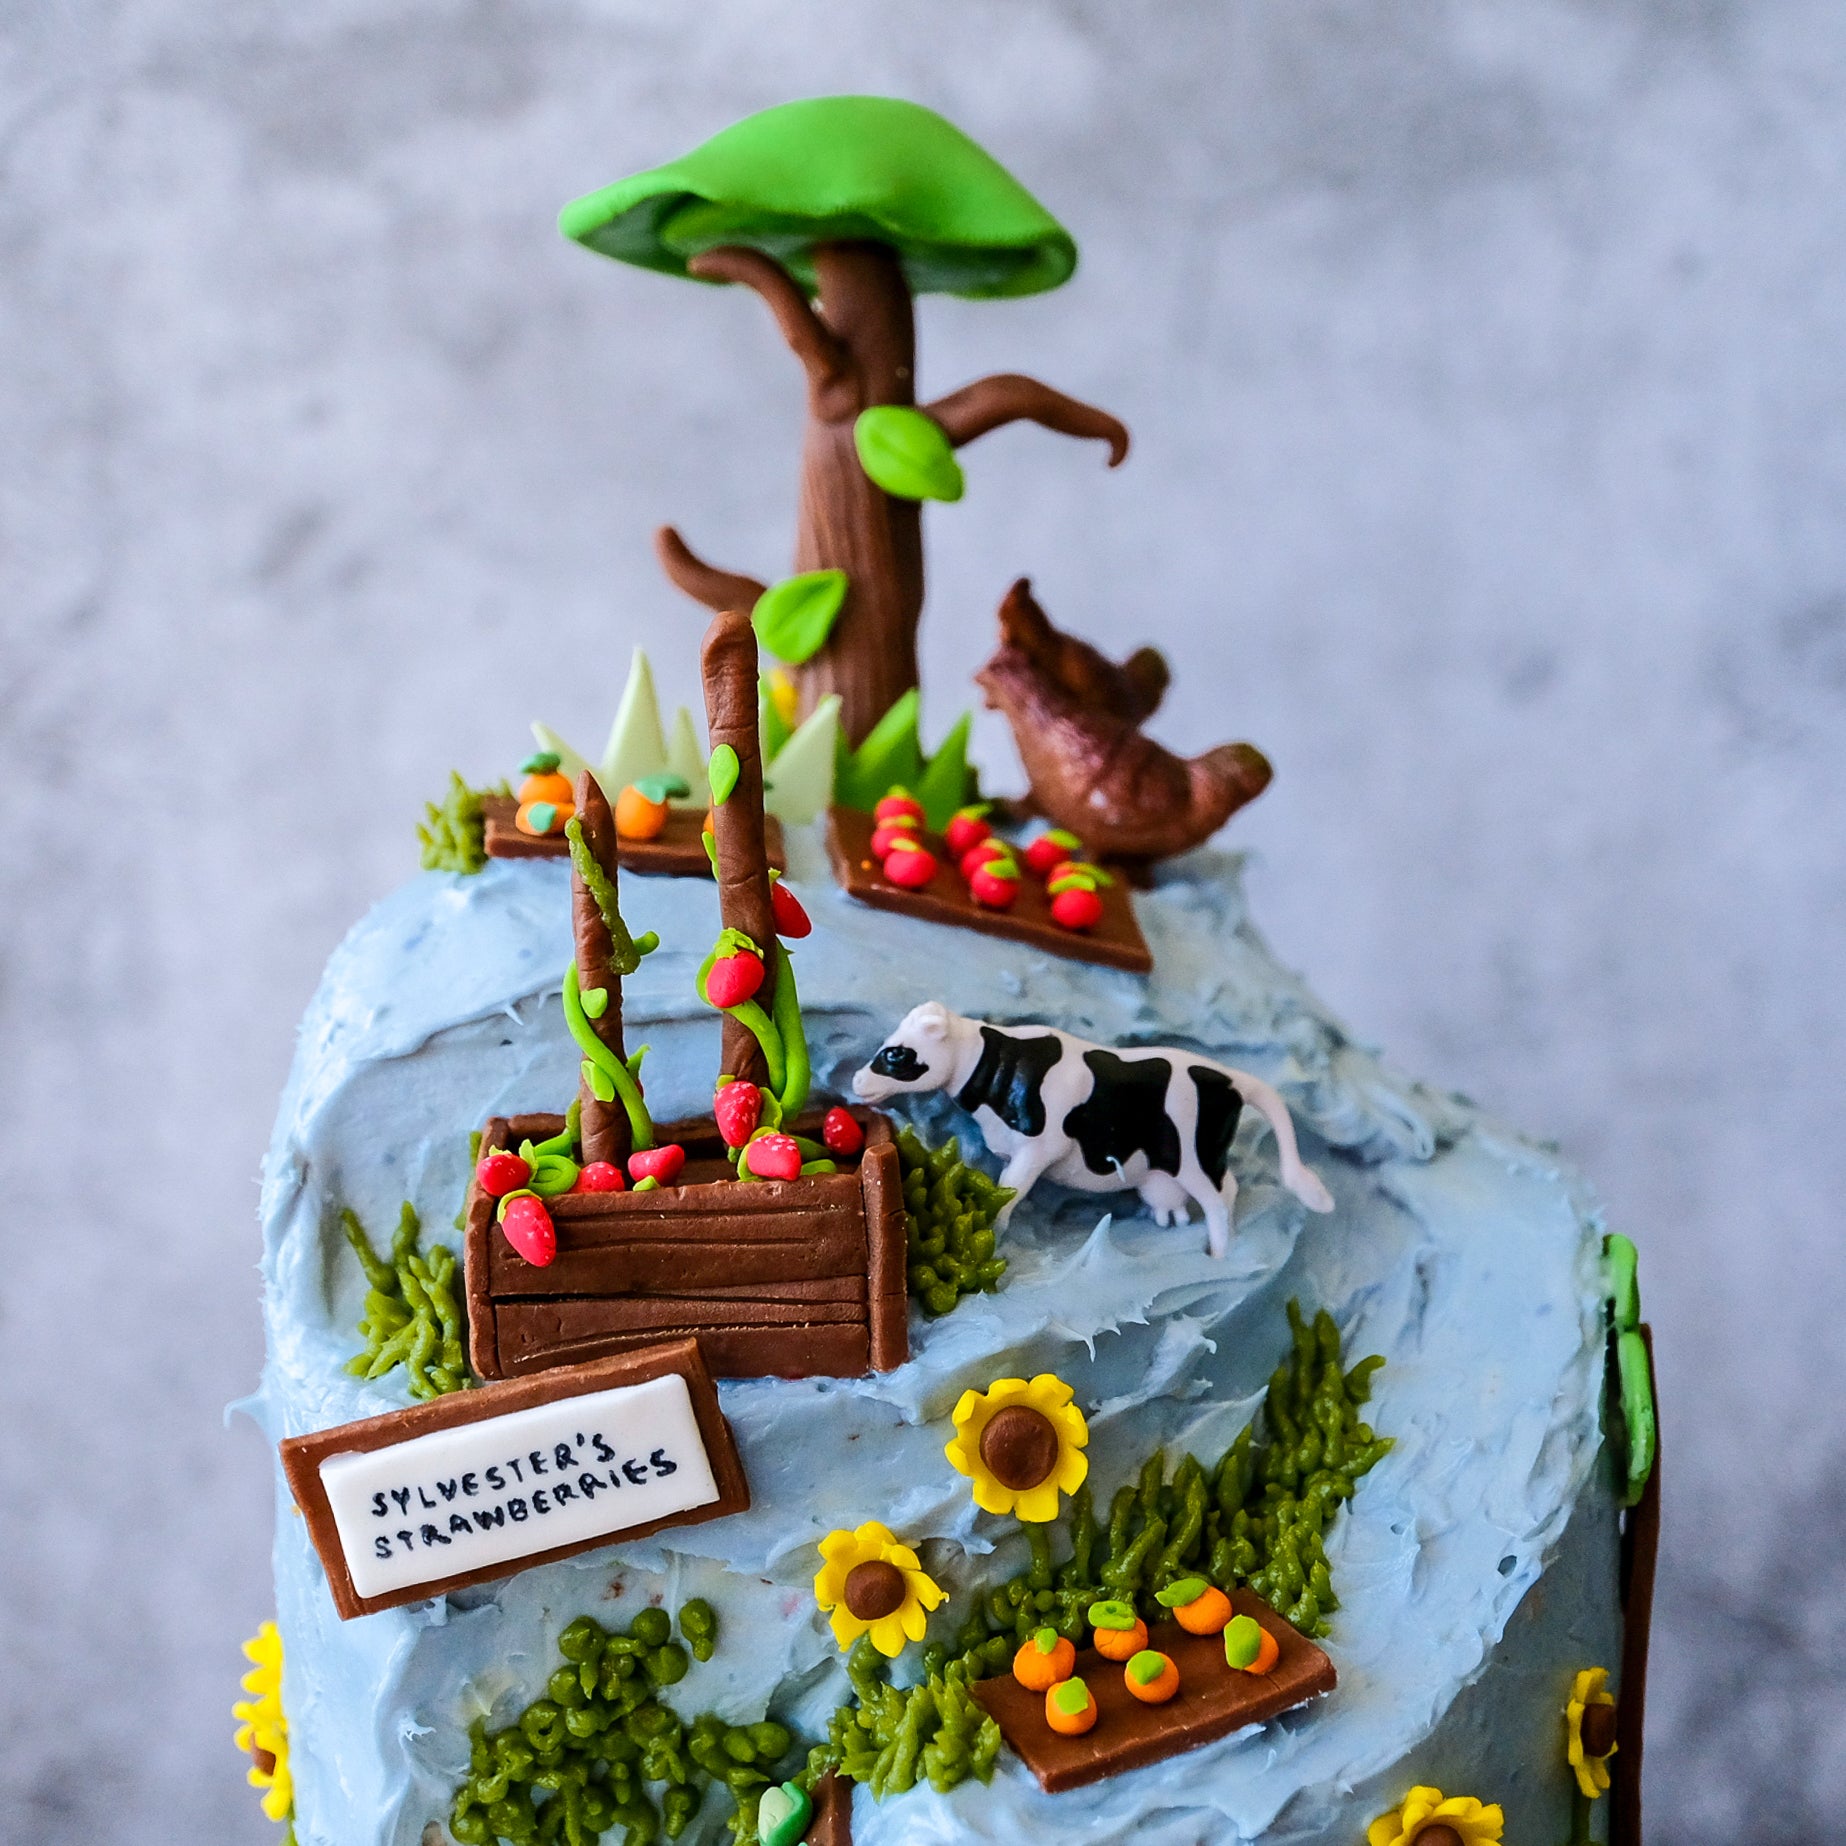 15 Ridiculously Stunning Nature Cakes That Are Almost Too Perfect To Eat